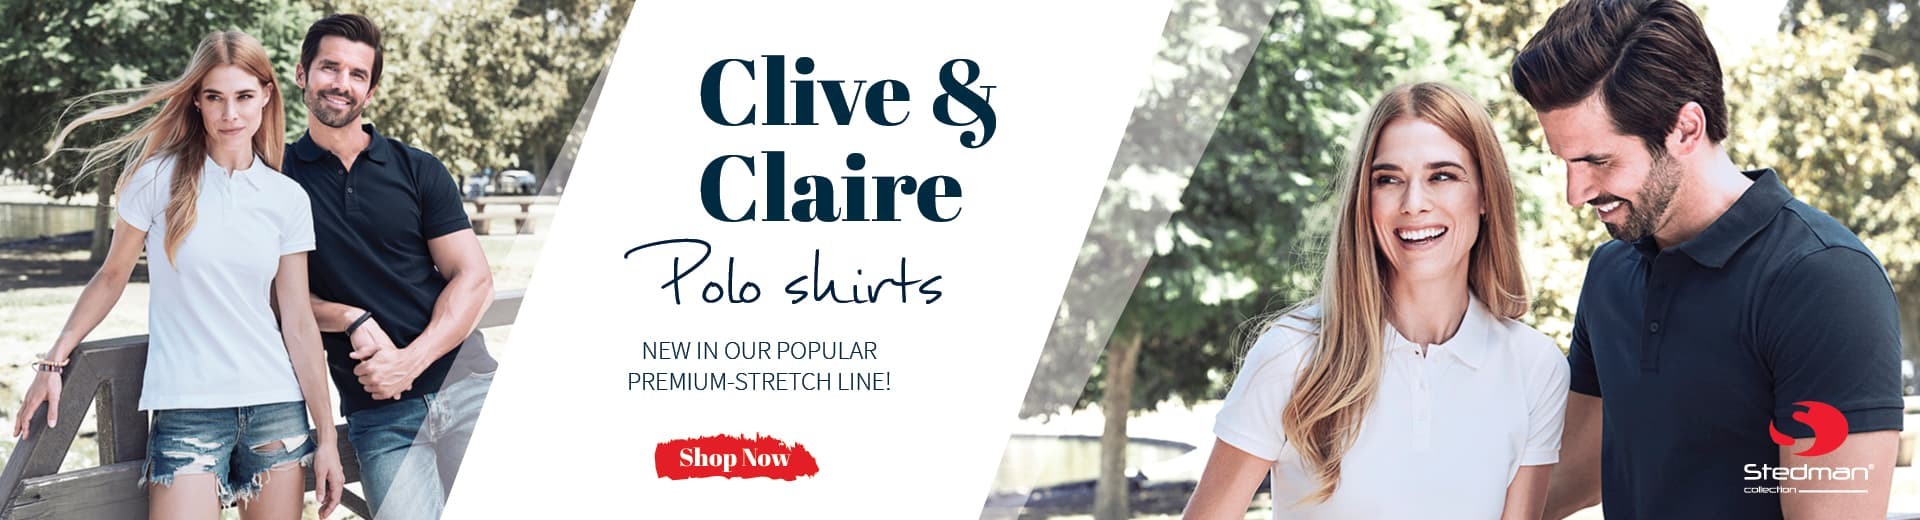 Clive & Claire Polos